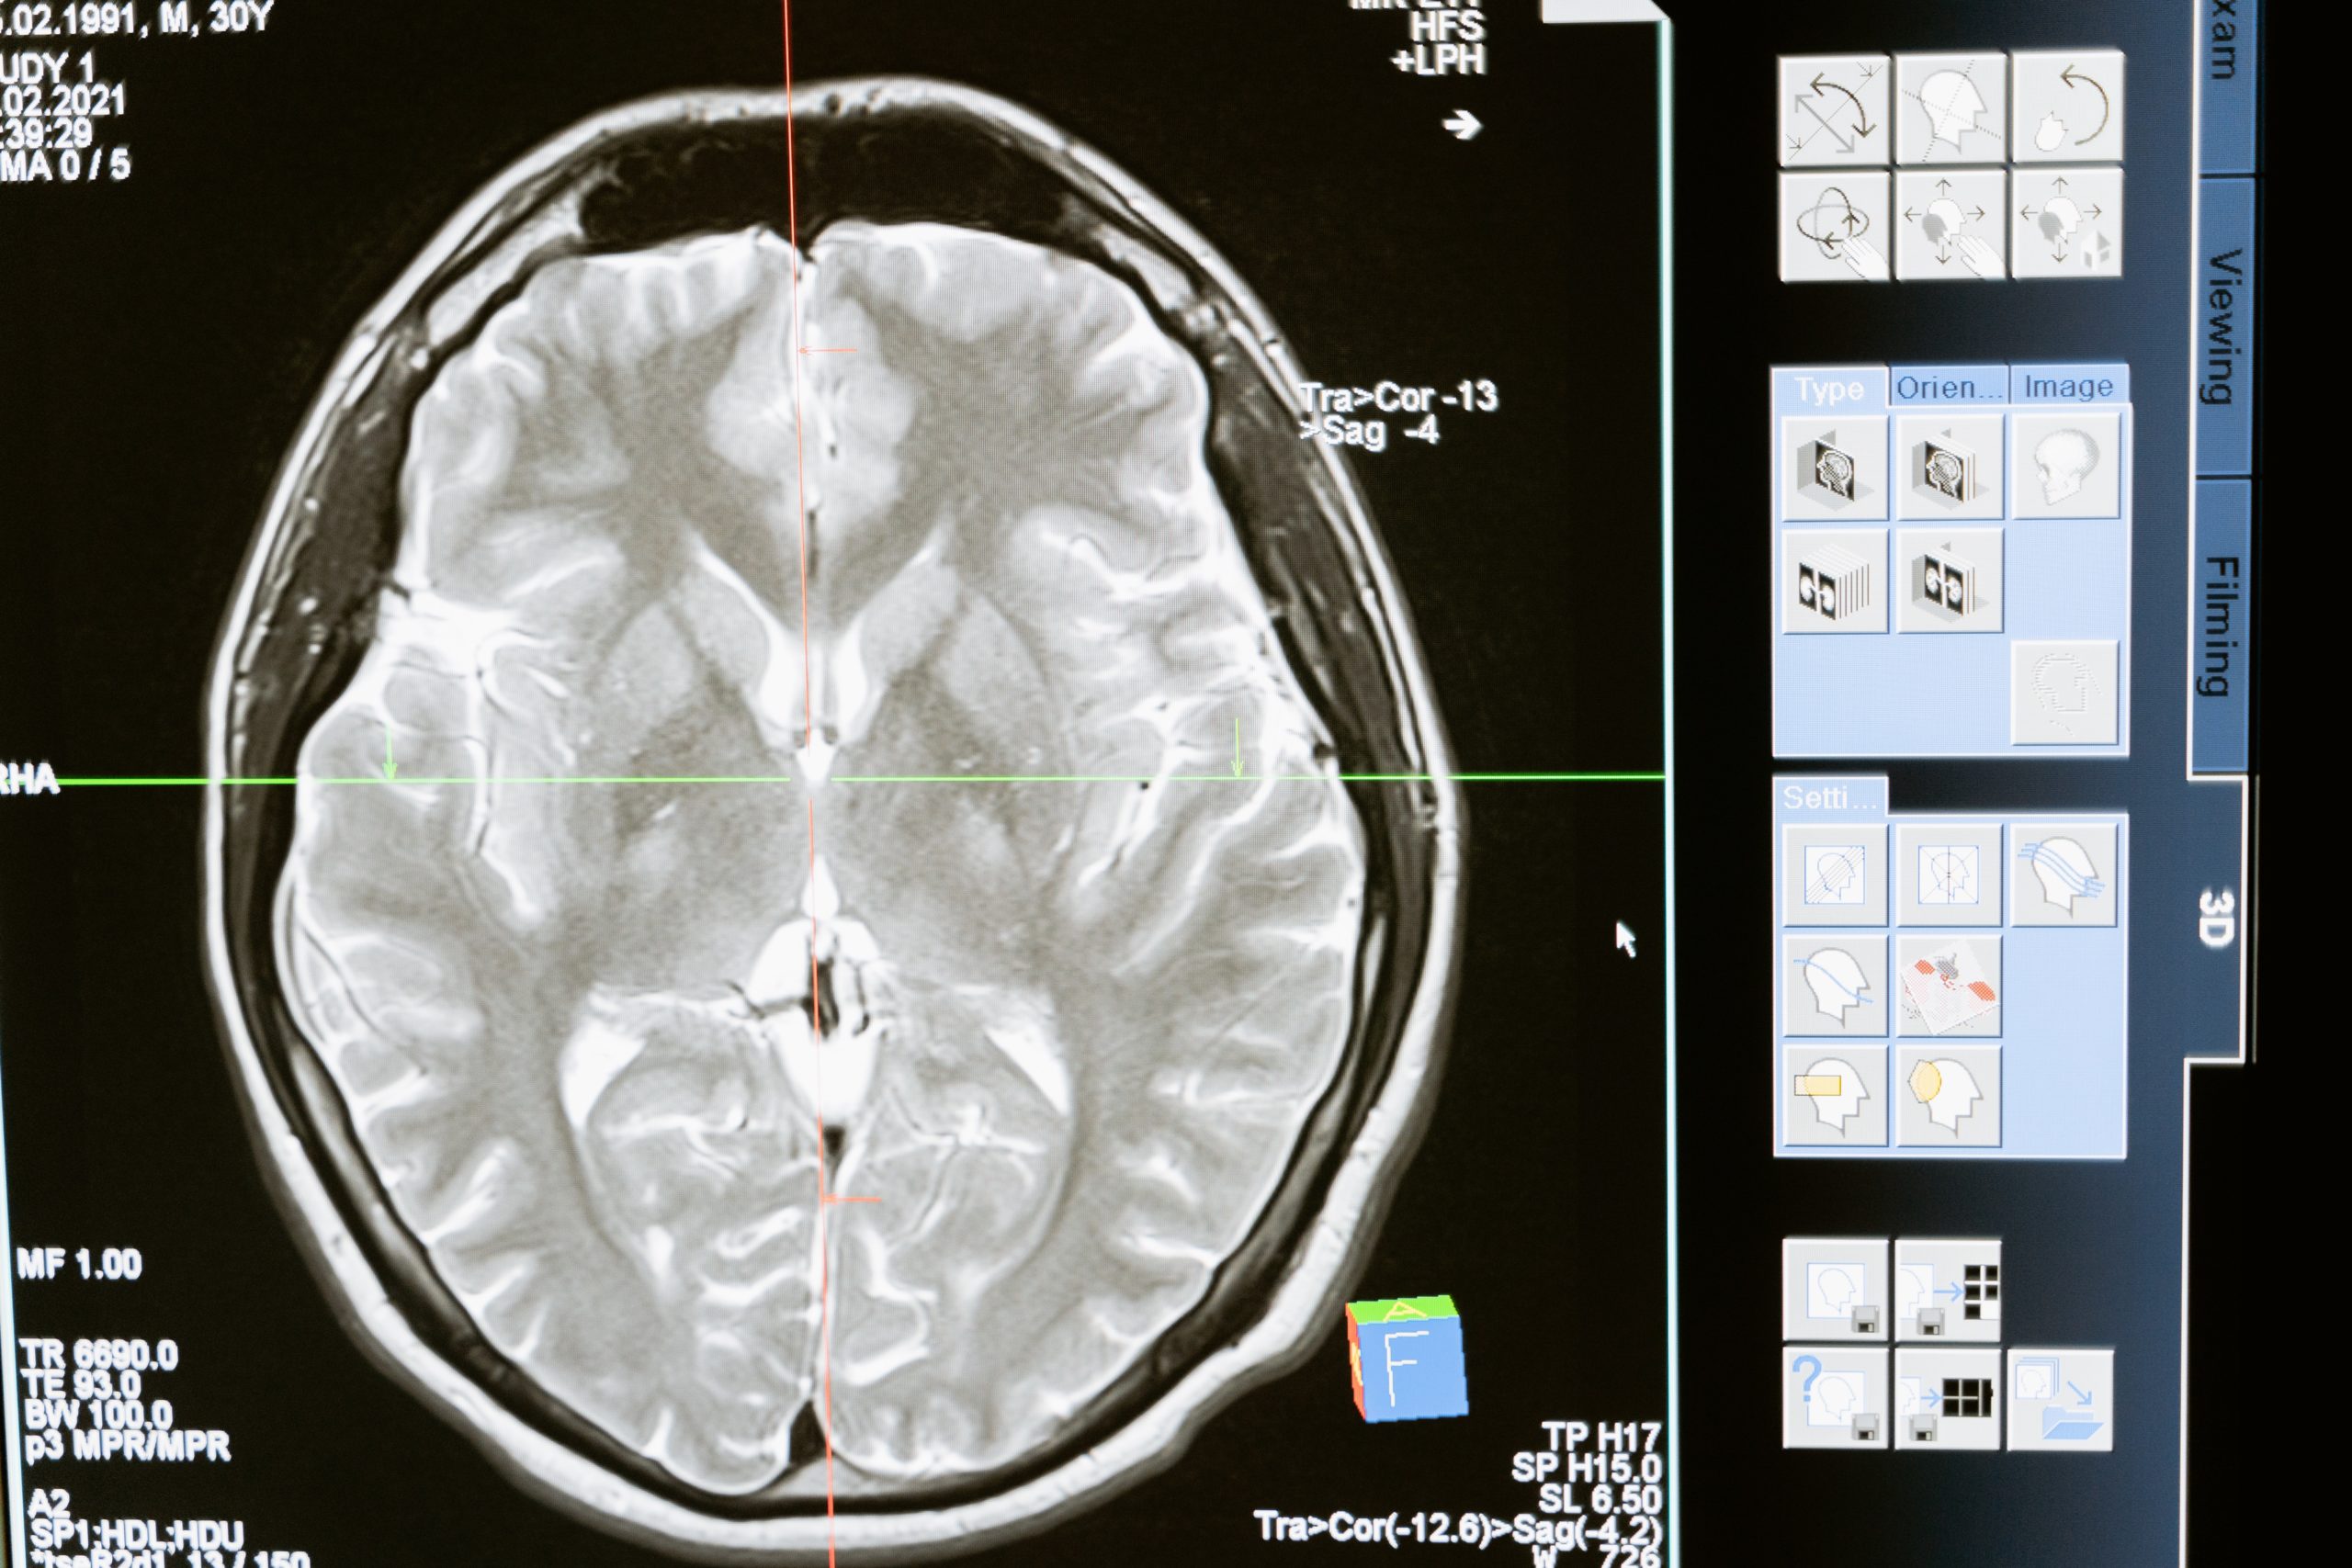 An image of a brain scan appears on a computer screen.